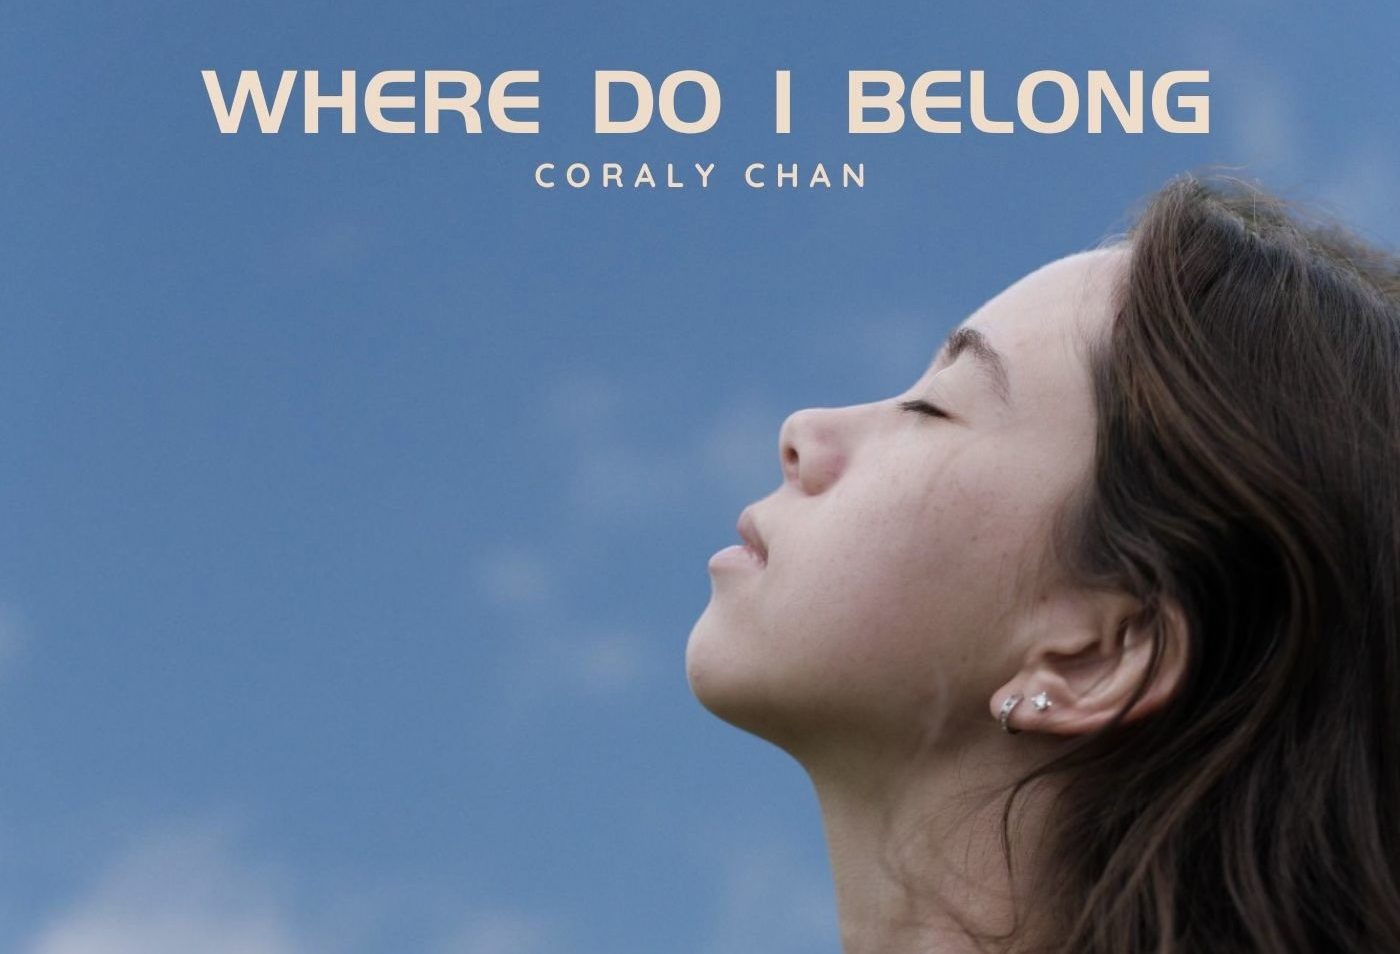 Coraly Chan: A Voice Finding Its Place in the World